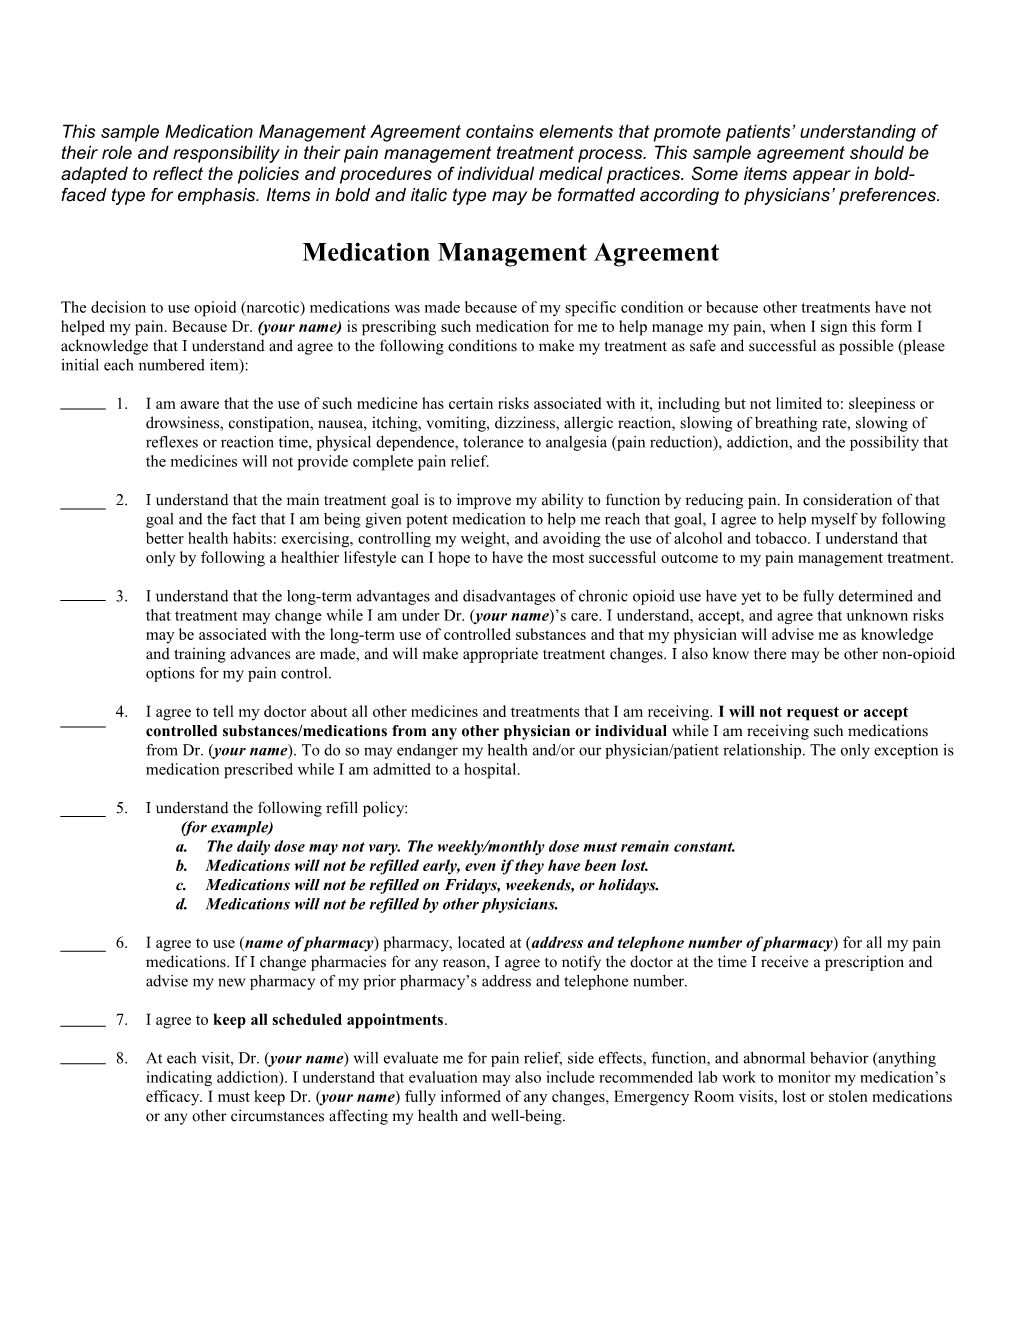 This Sample Medication Management Agreement Contains Elements That Promote Patients